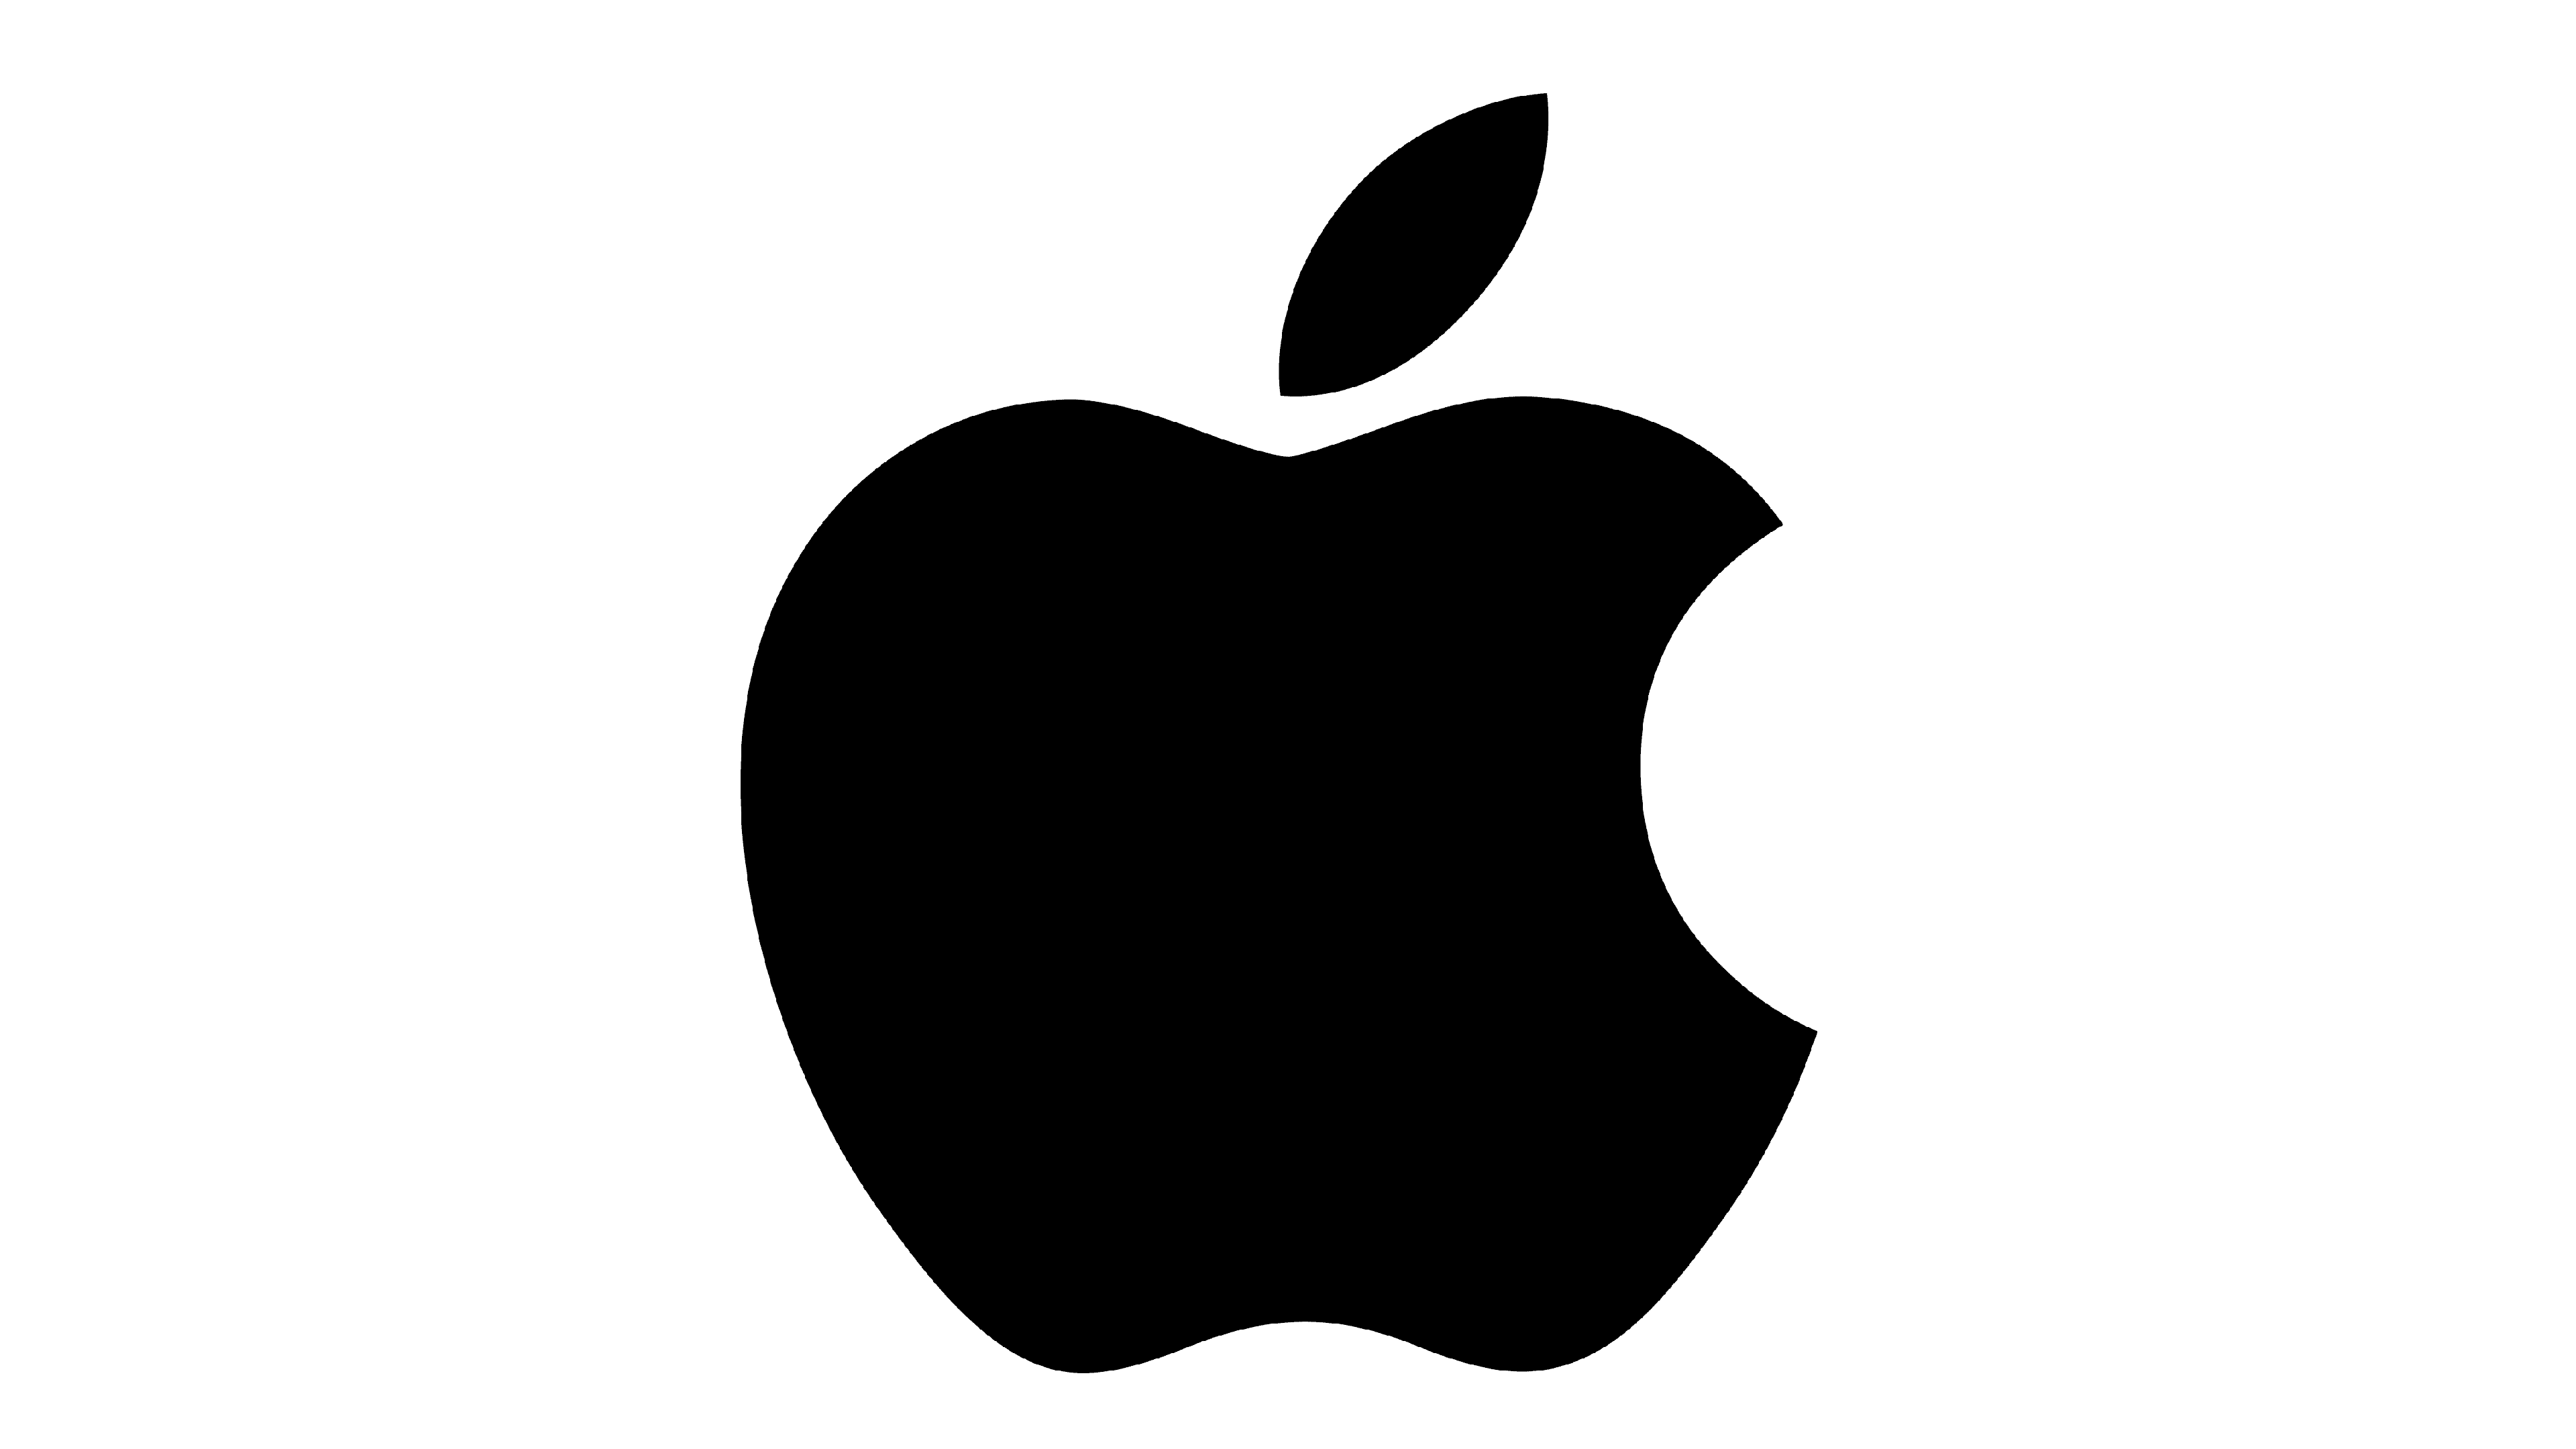 Apple will compete with Google Bard and Microsoft’s Bing chatbot in the AI space.-thumnail